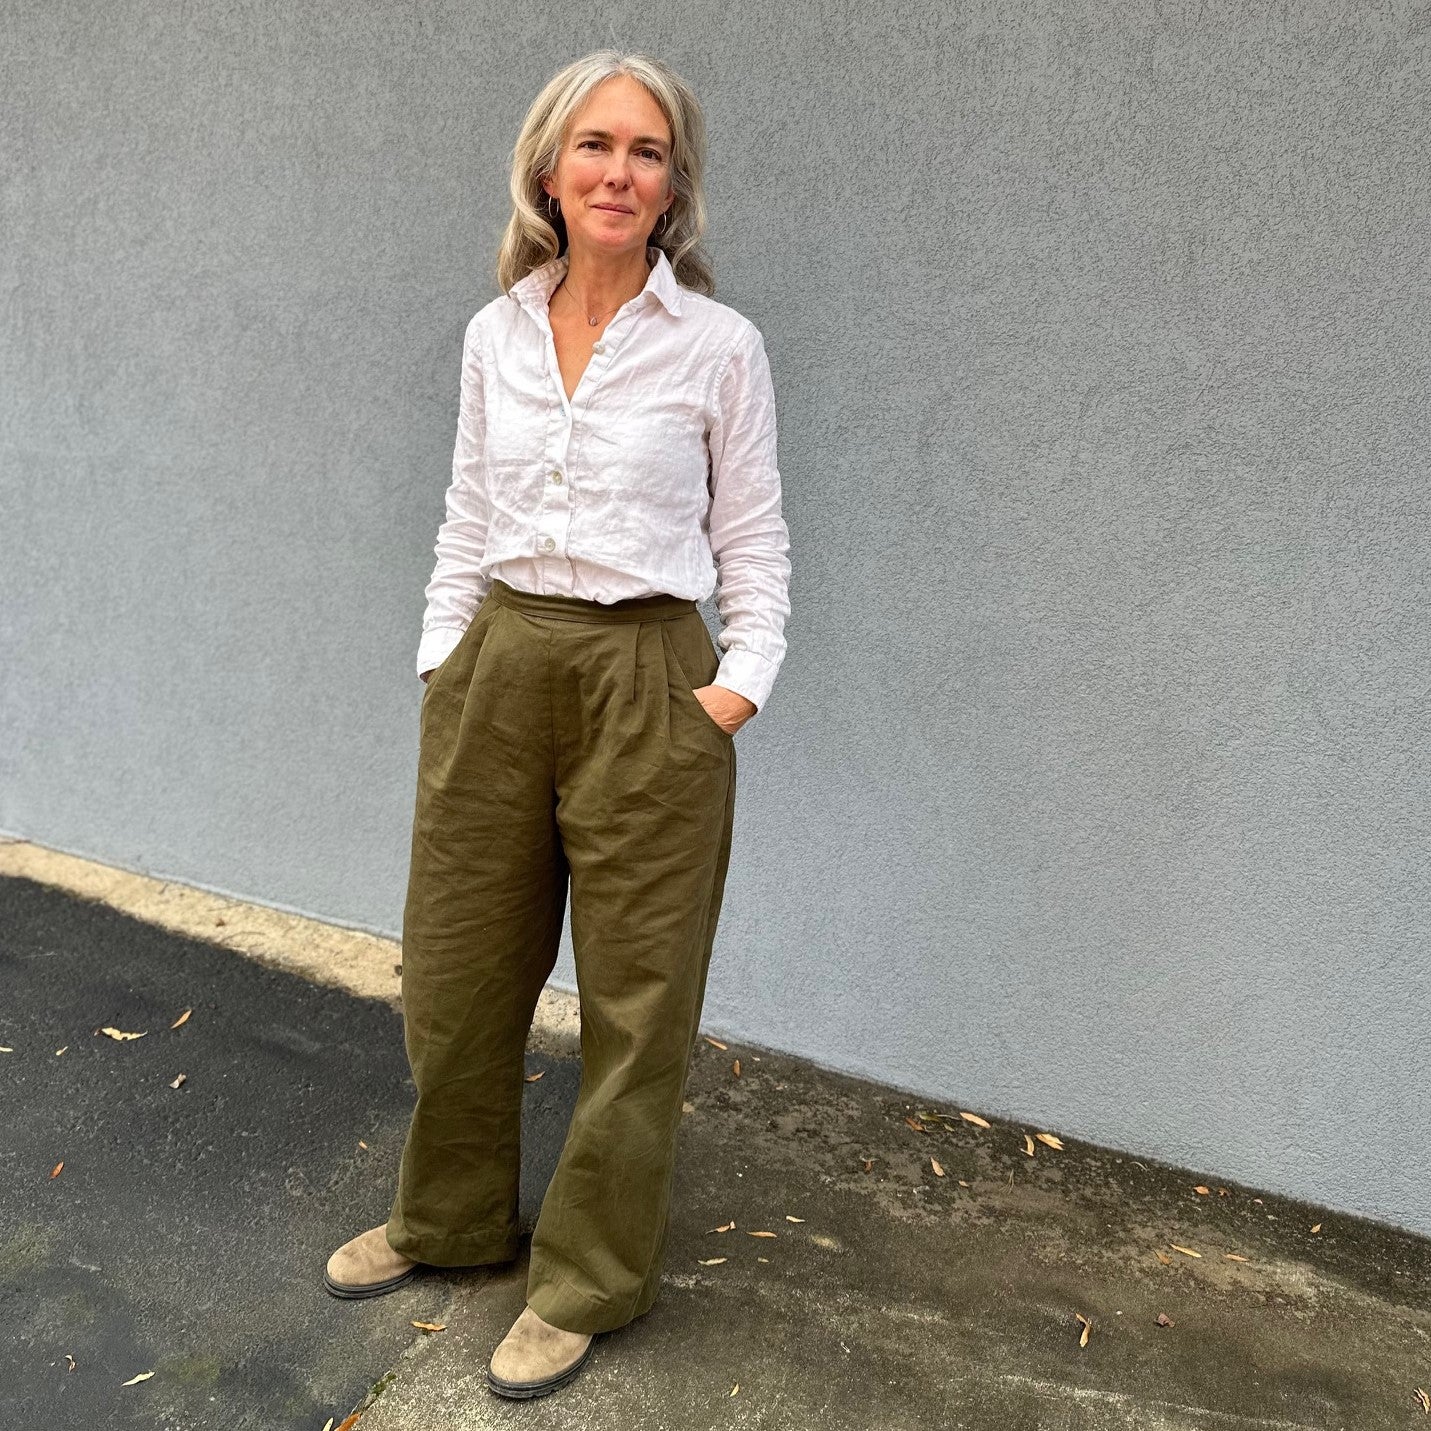 Woman standing in front of a grey wall wearing a white linen shirt and olive wide-legged trousers.